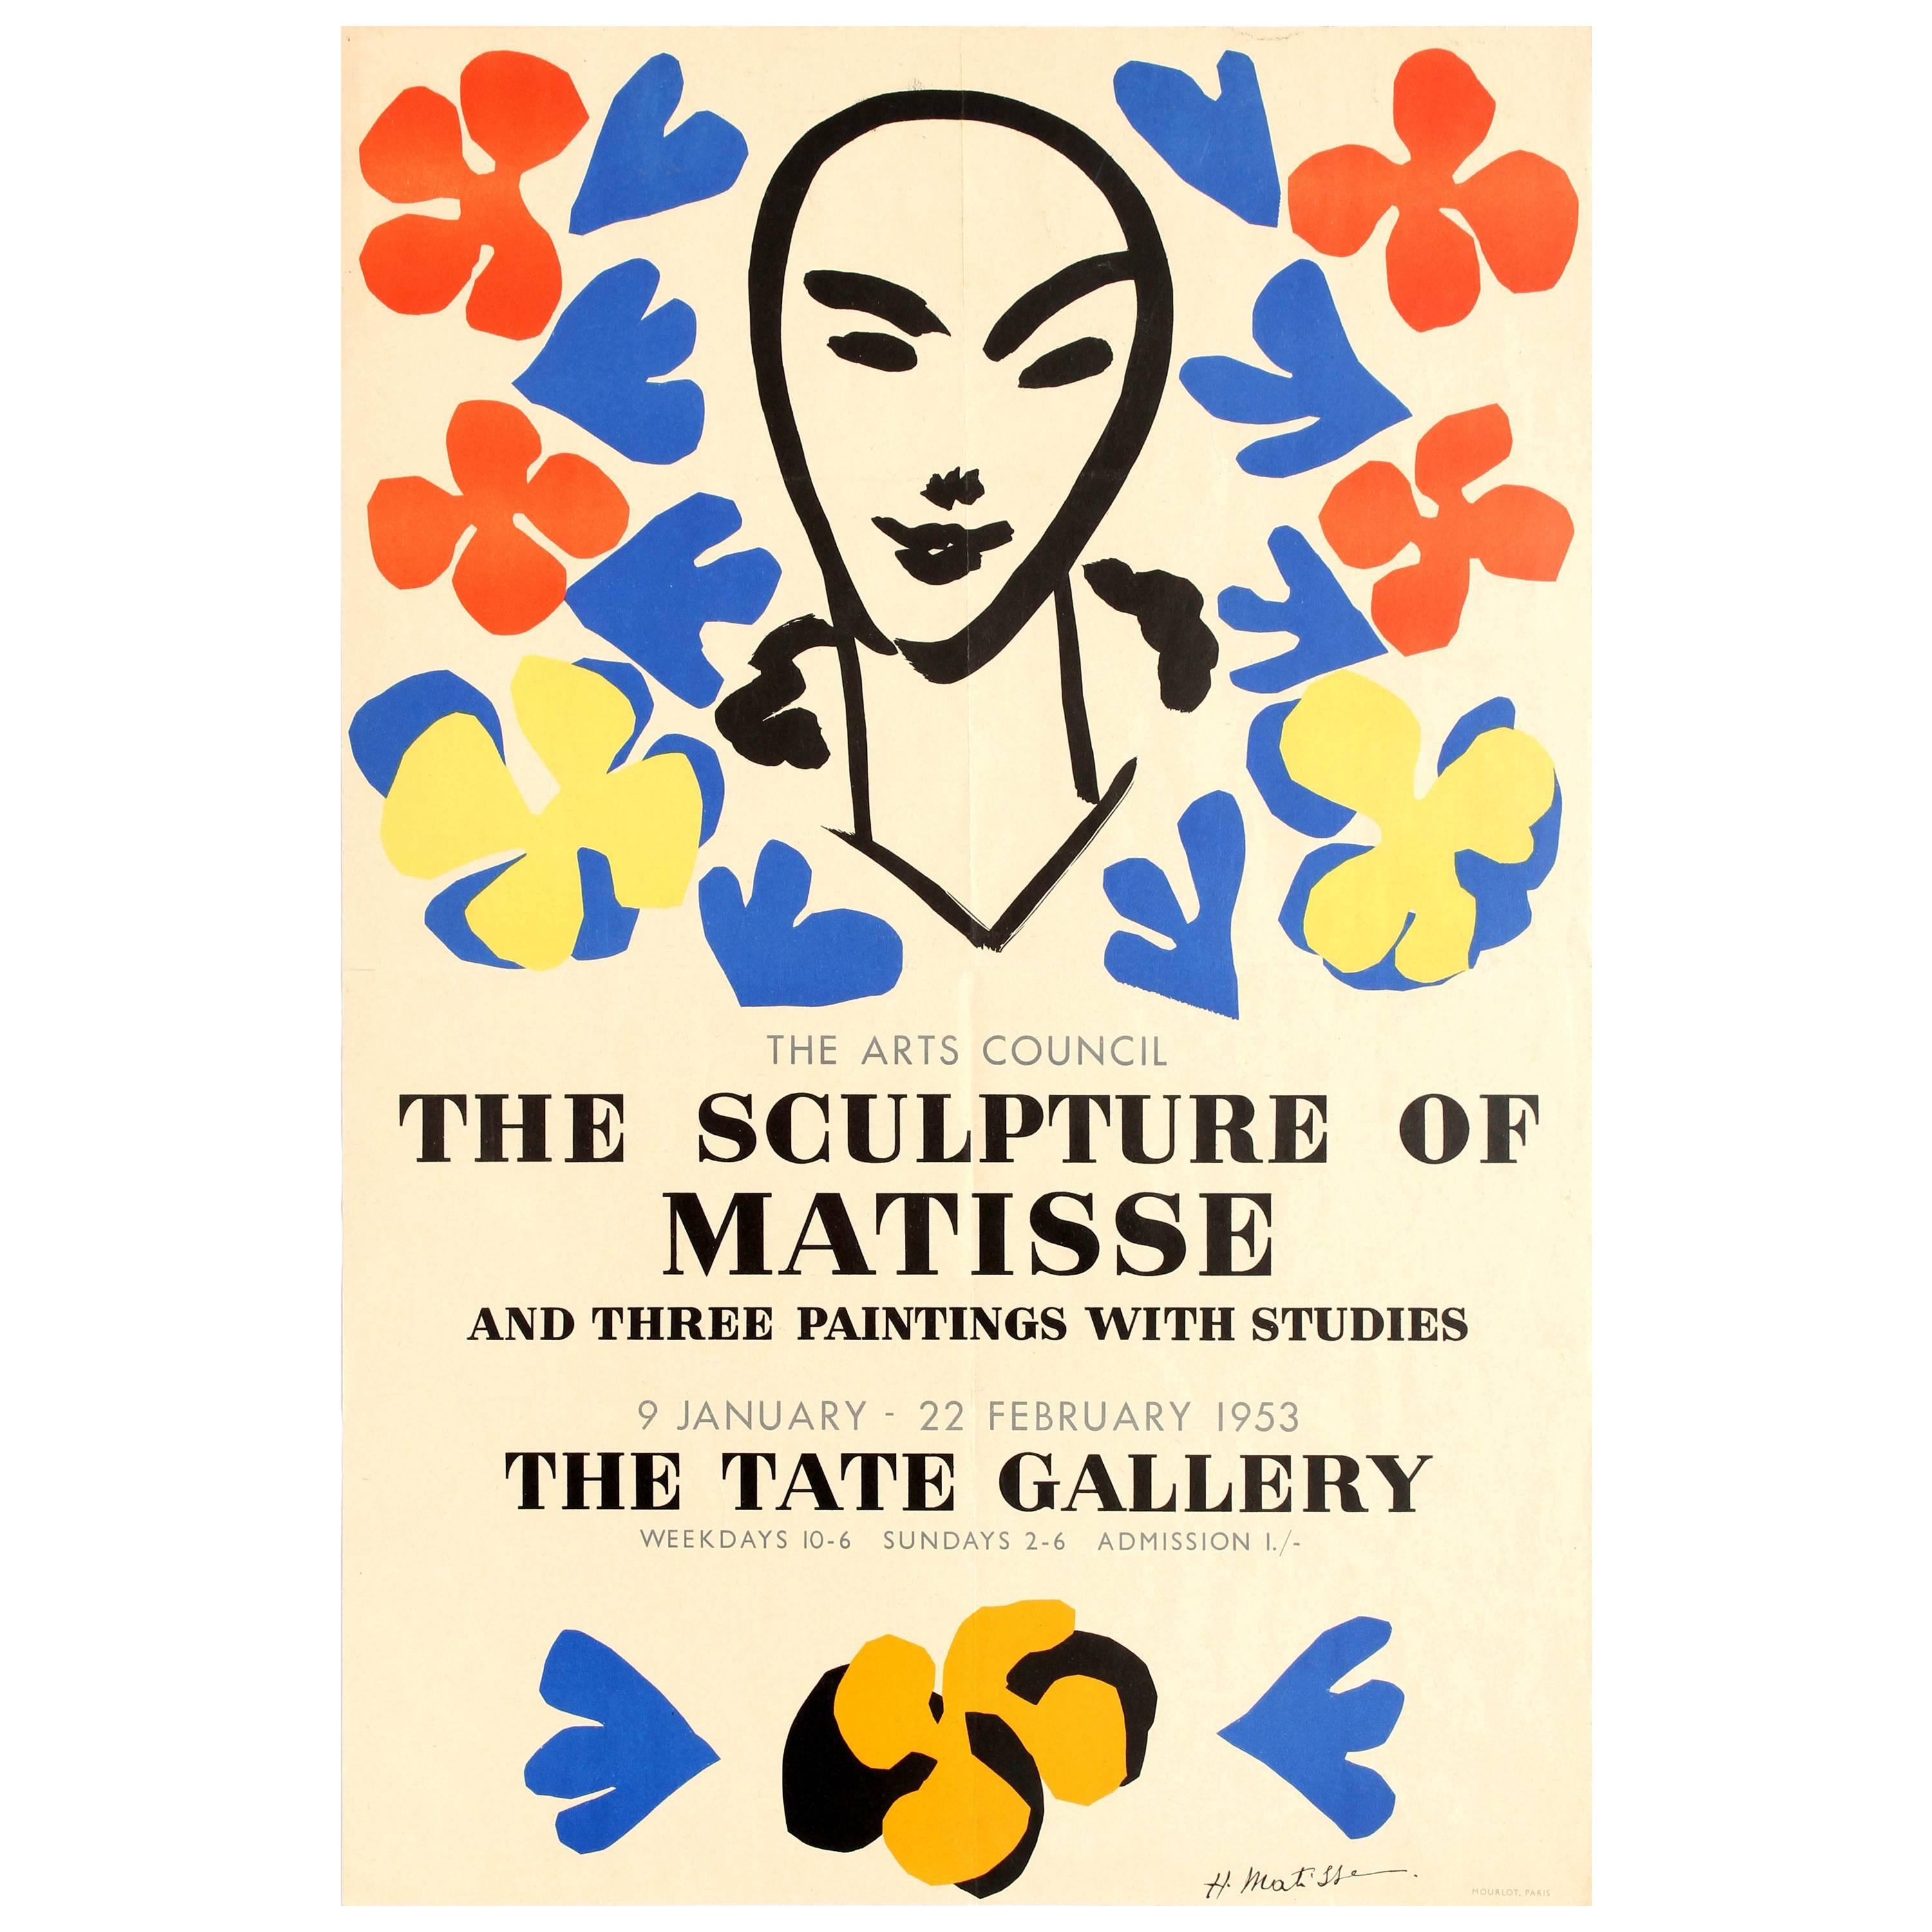 Original Vintage Arts Council Exhibition Poster for Matisse At The Tate Gallery